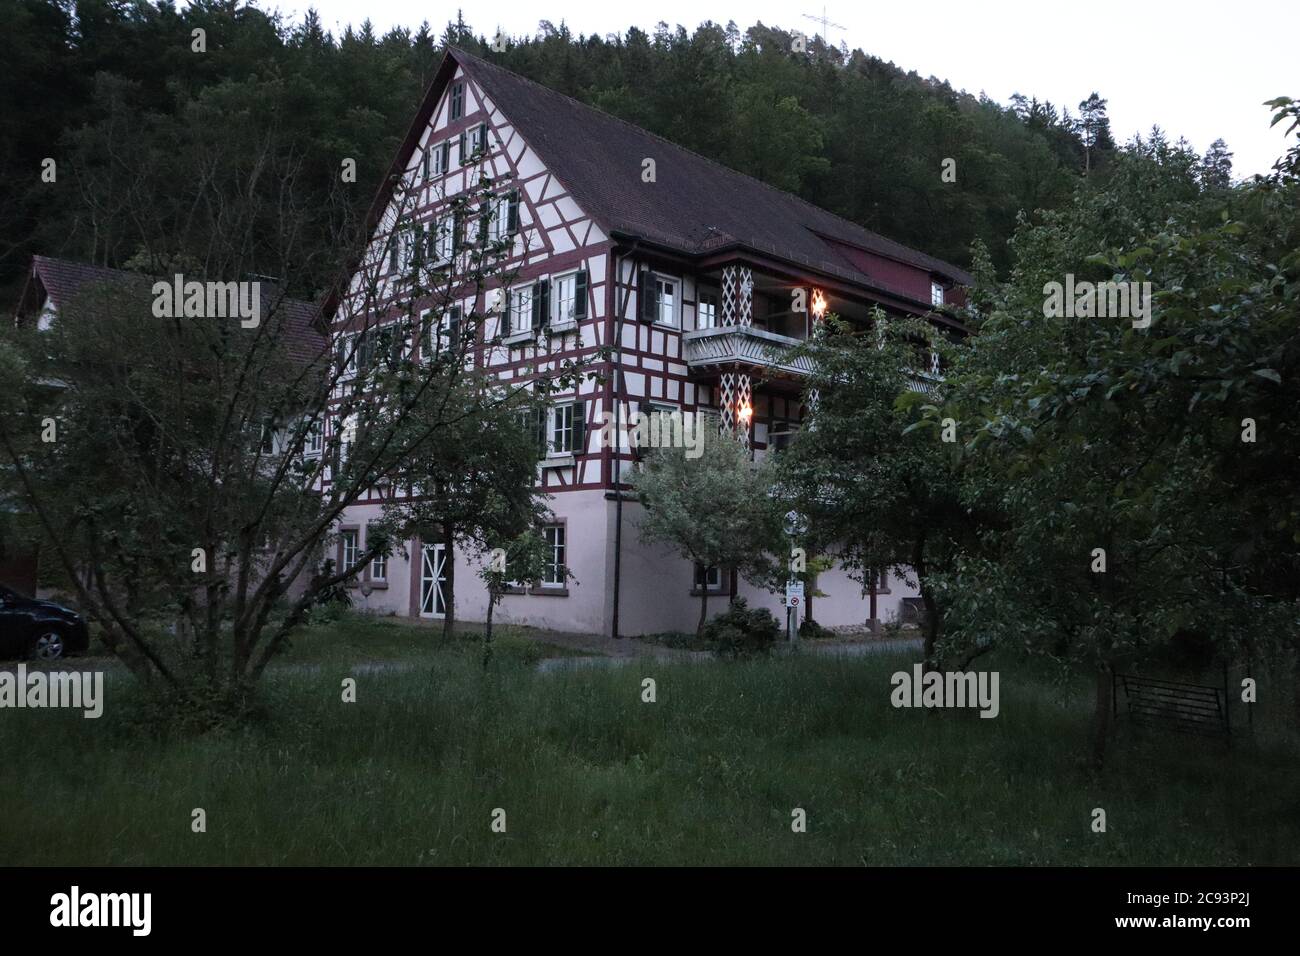 Bad Liebenzell, Baden-Württemberg/ Germany - June 01 2019: Half-timbered Hotel located in a park area of town Bad Liebenzell, Germany ('Thermen Hotel' Stock Photo